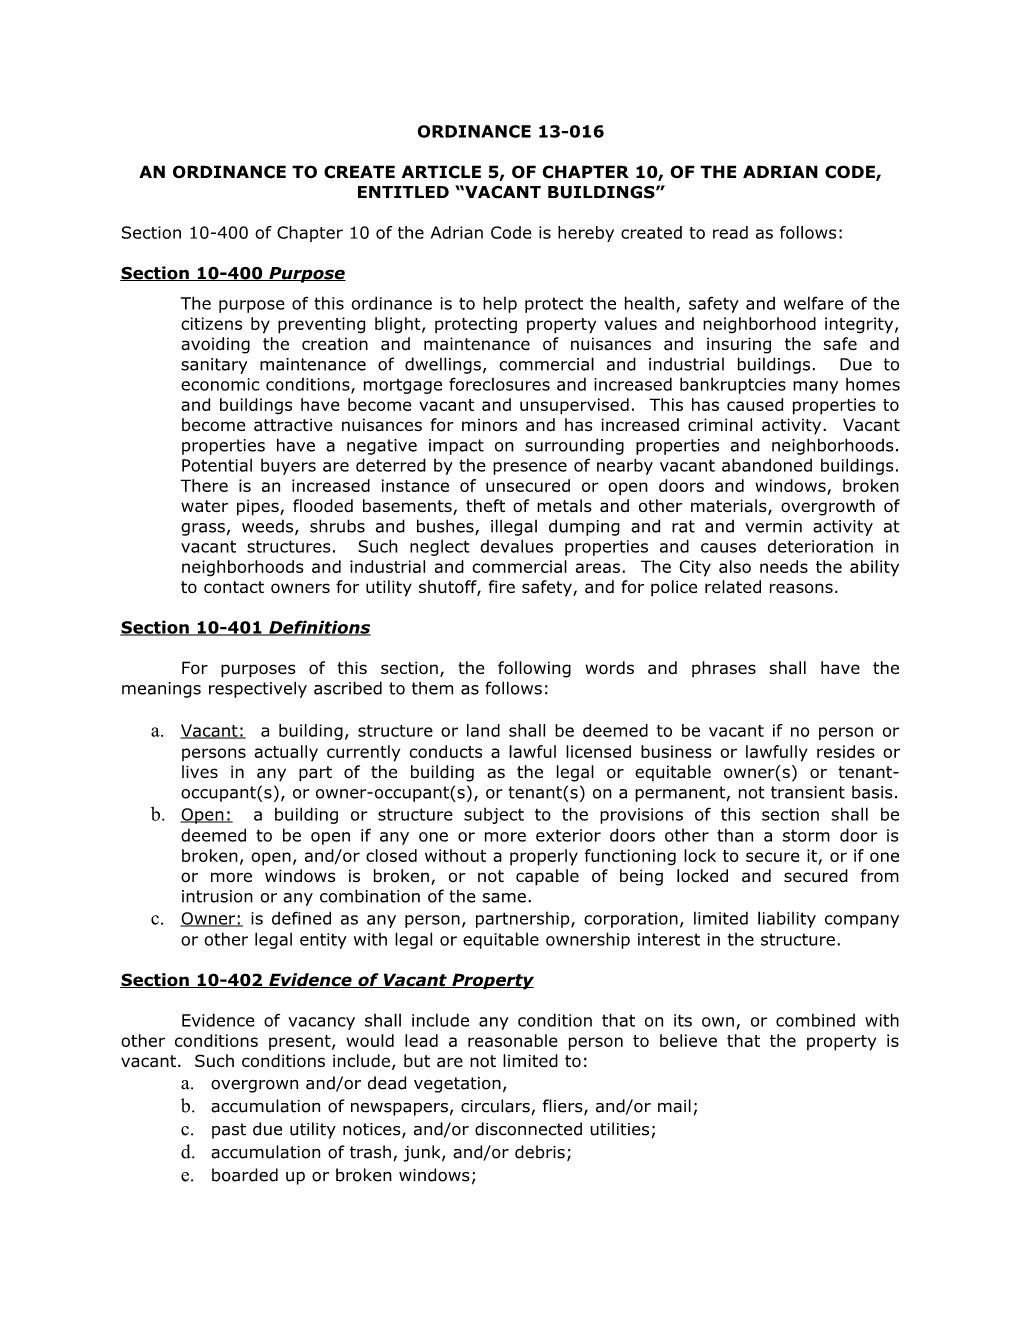 An Ordinance to Create Article 5, of Chapter 10, of the Adrian Code, Entitled Vacant Buildings